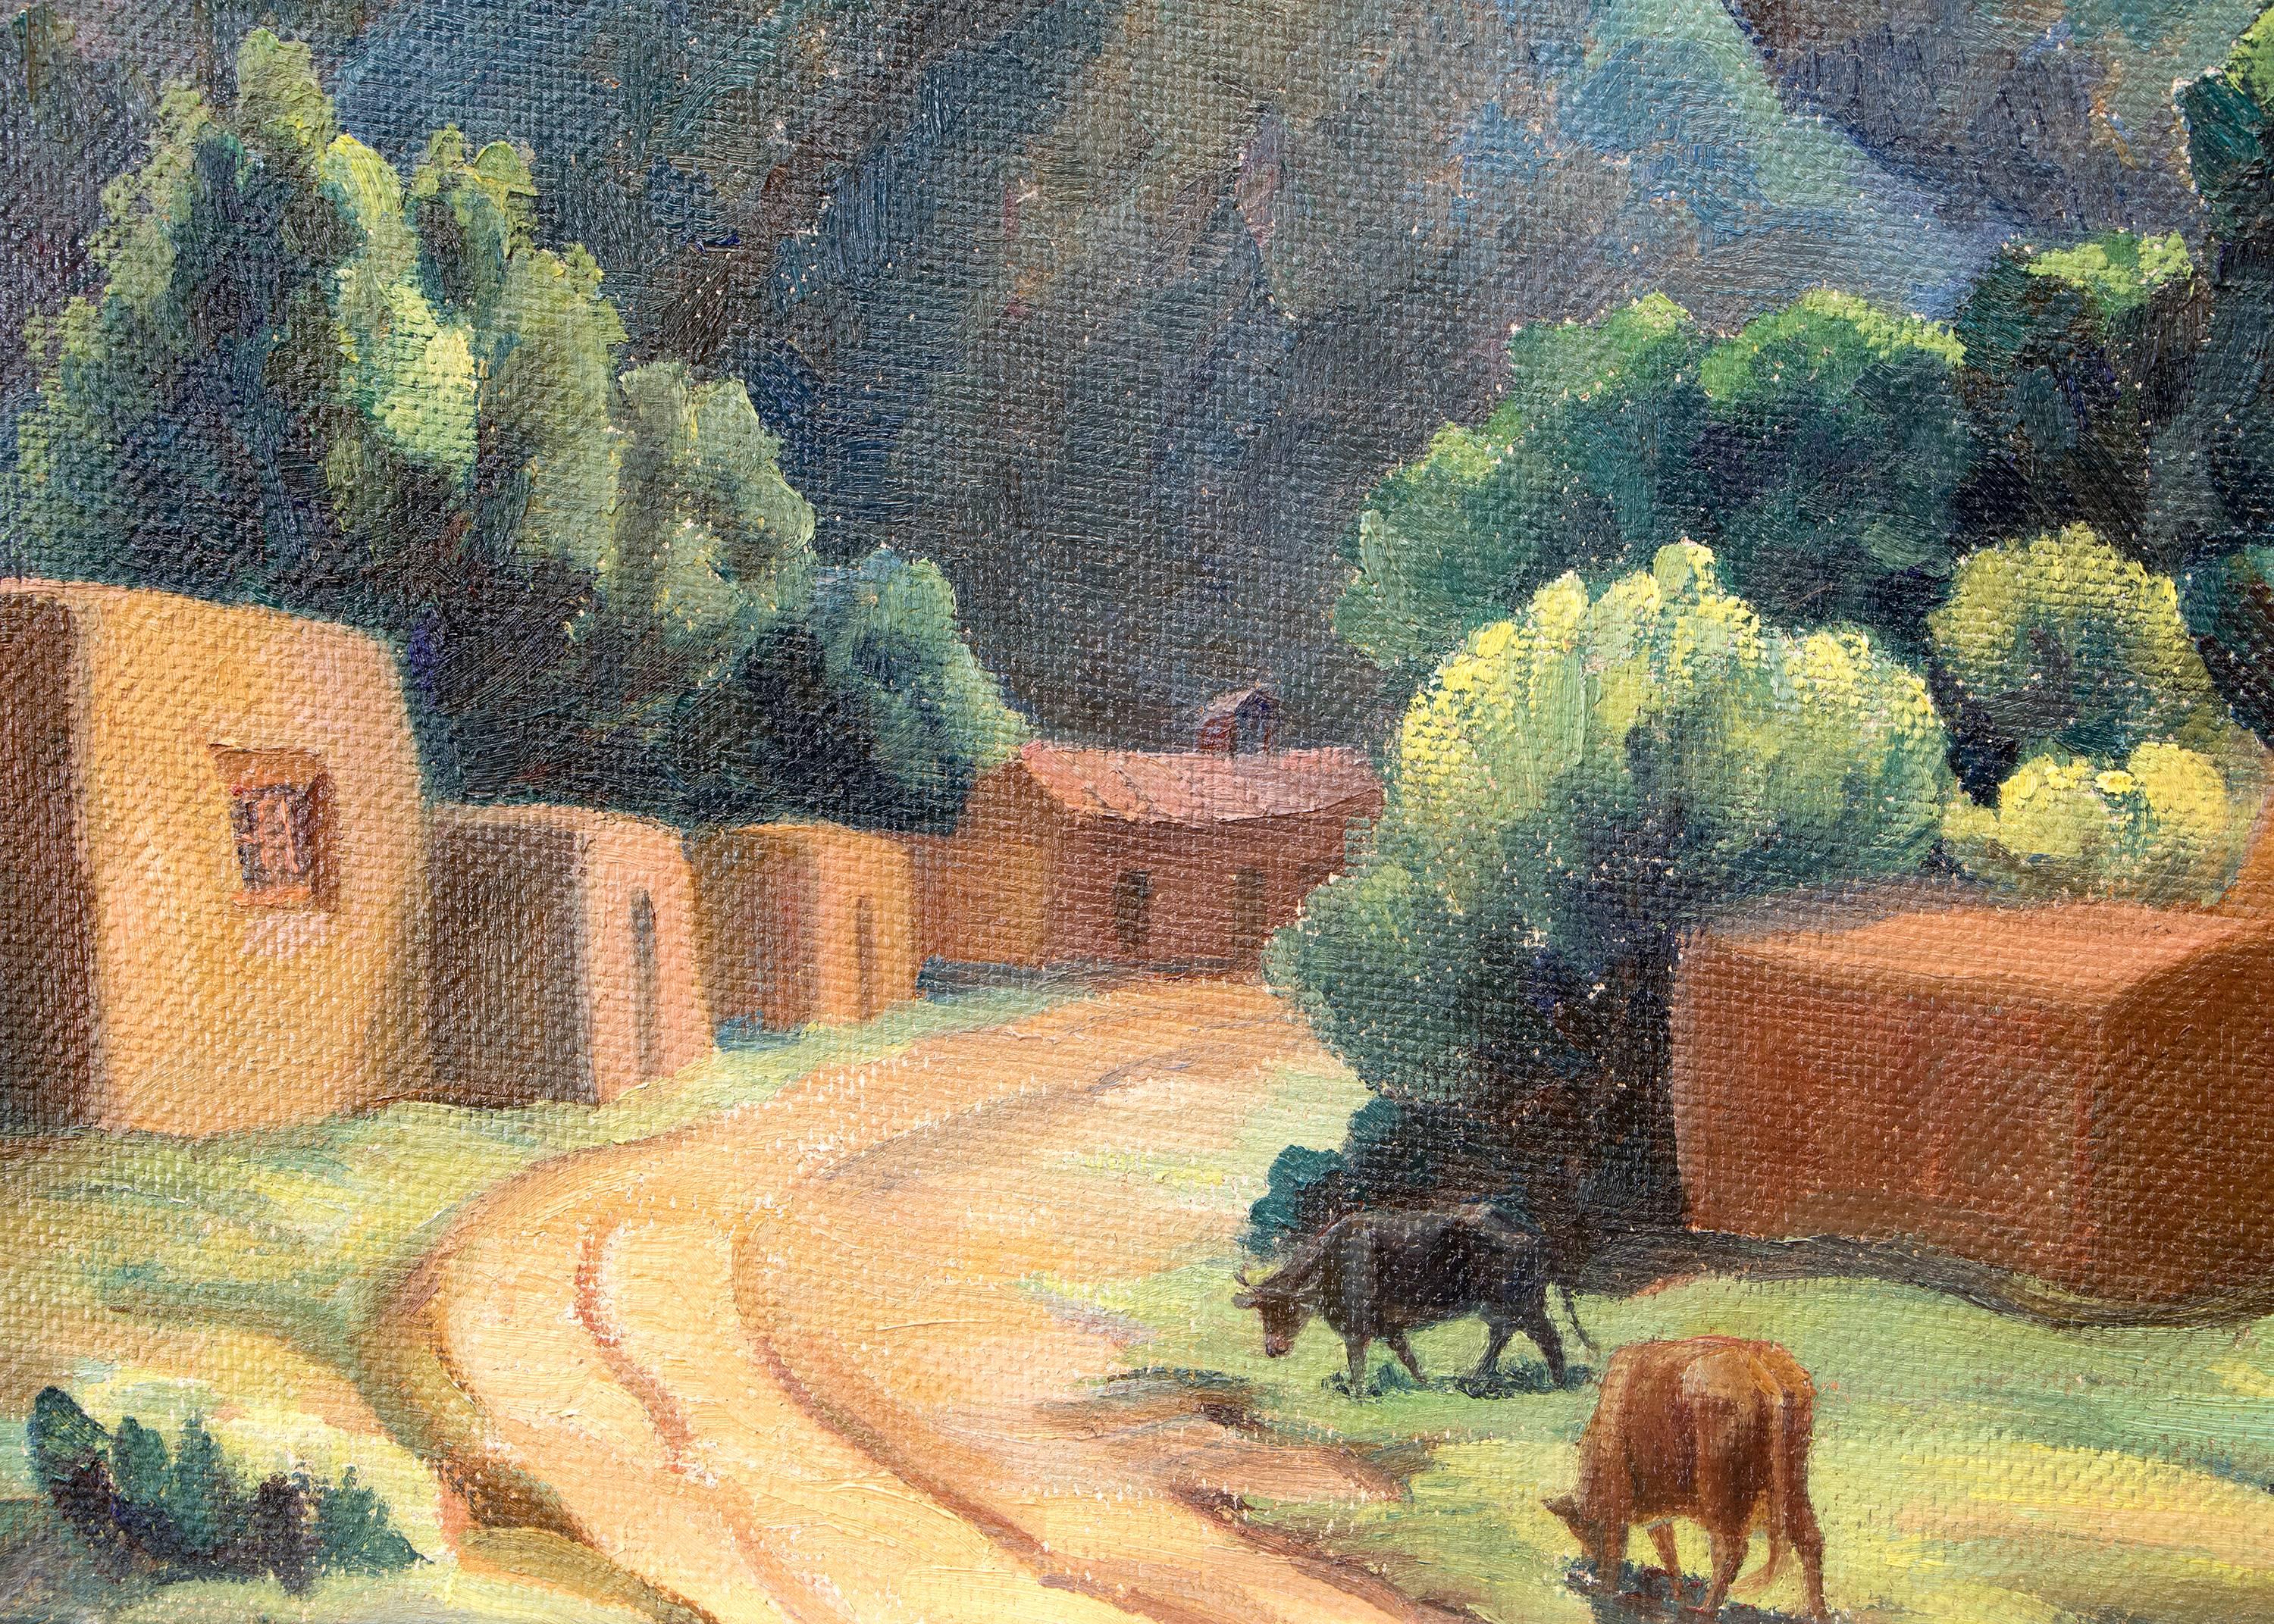 Arroyo Seco - Near Taos, New Mexico - Brown Landscape Painting by Anna Keener